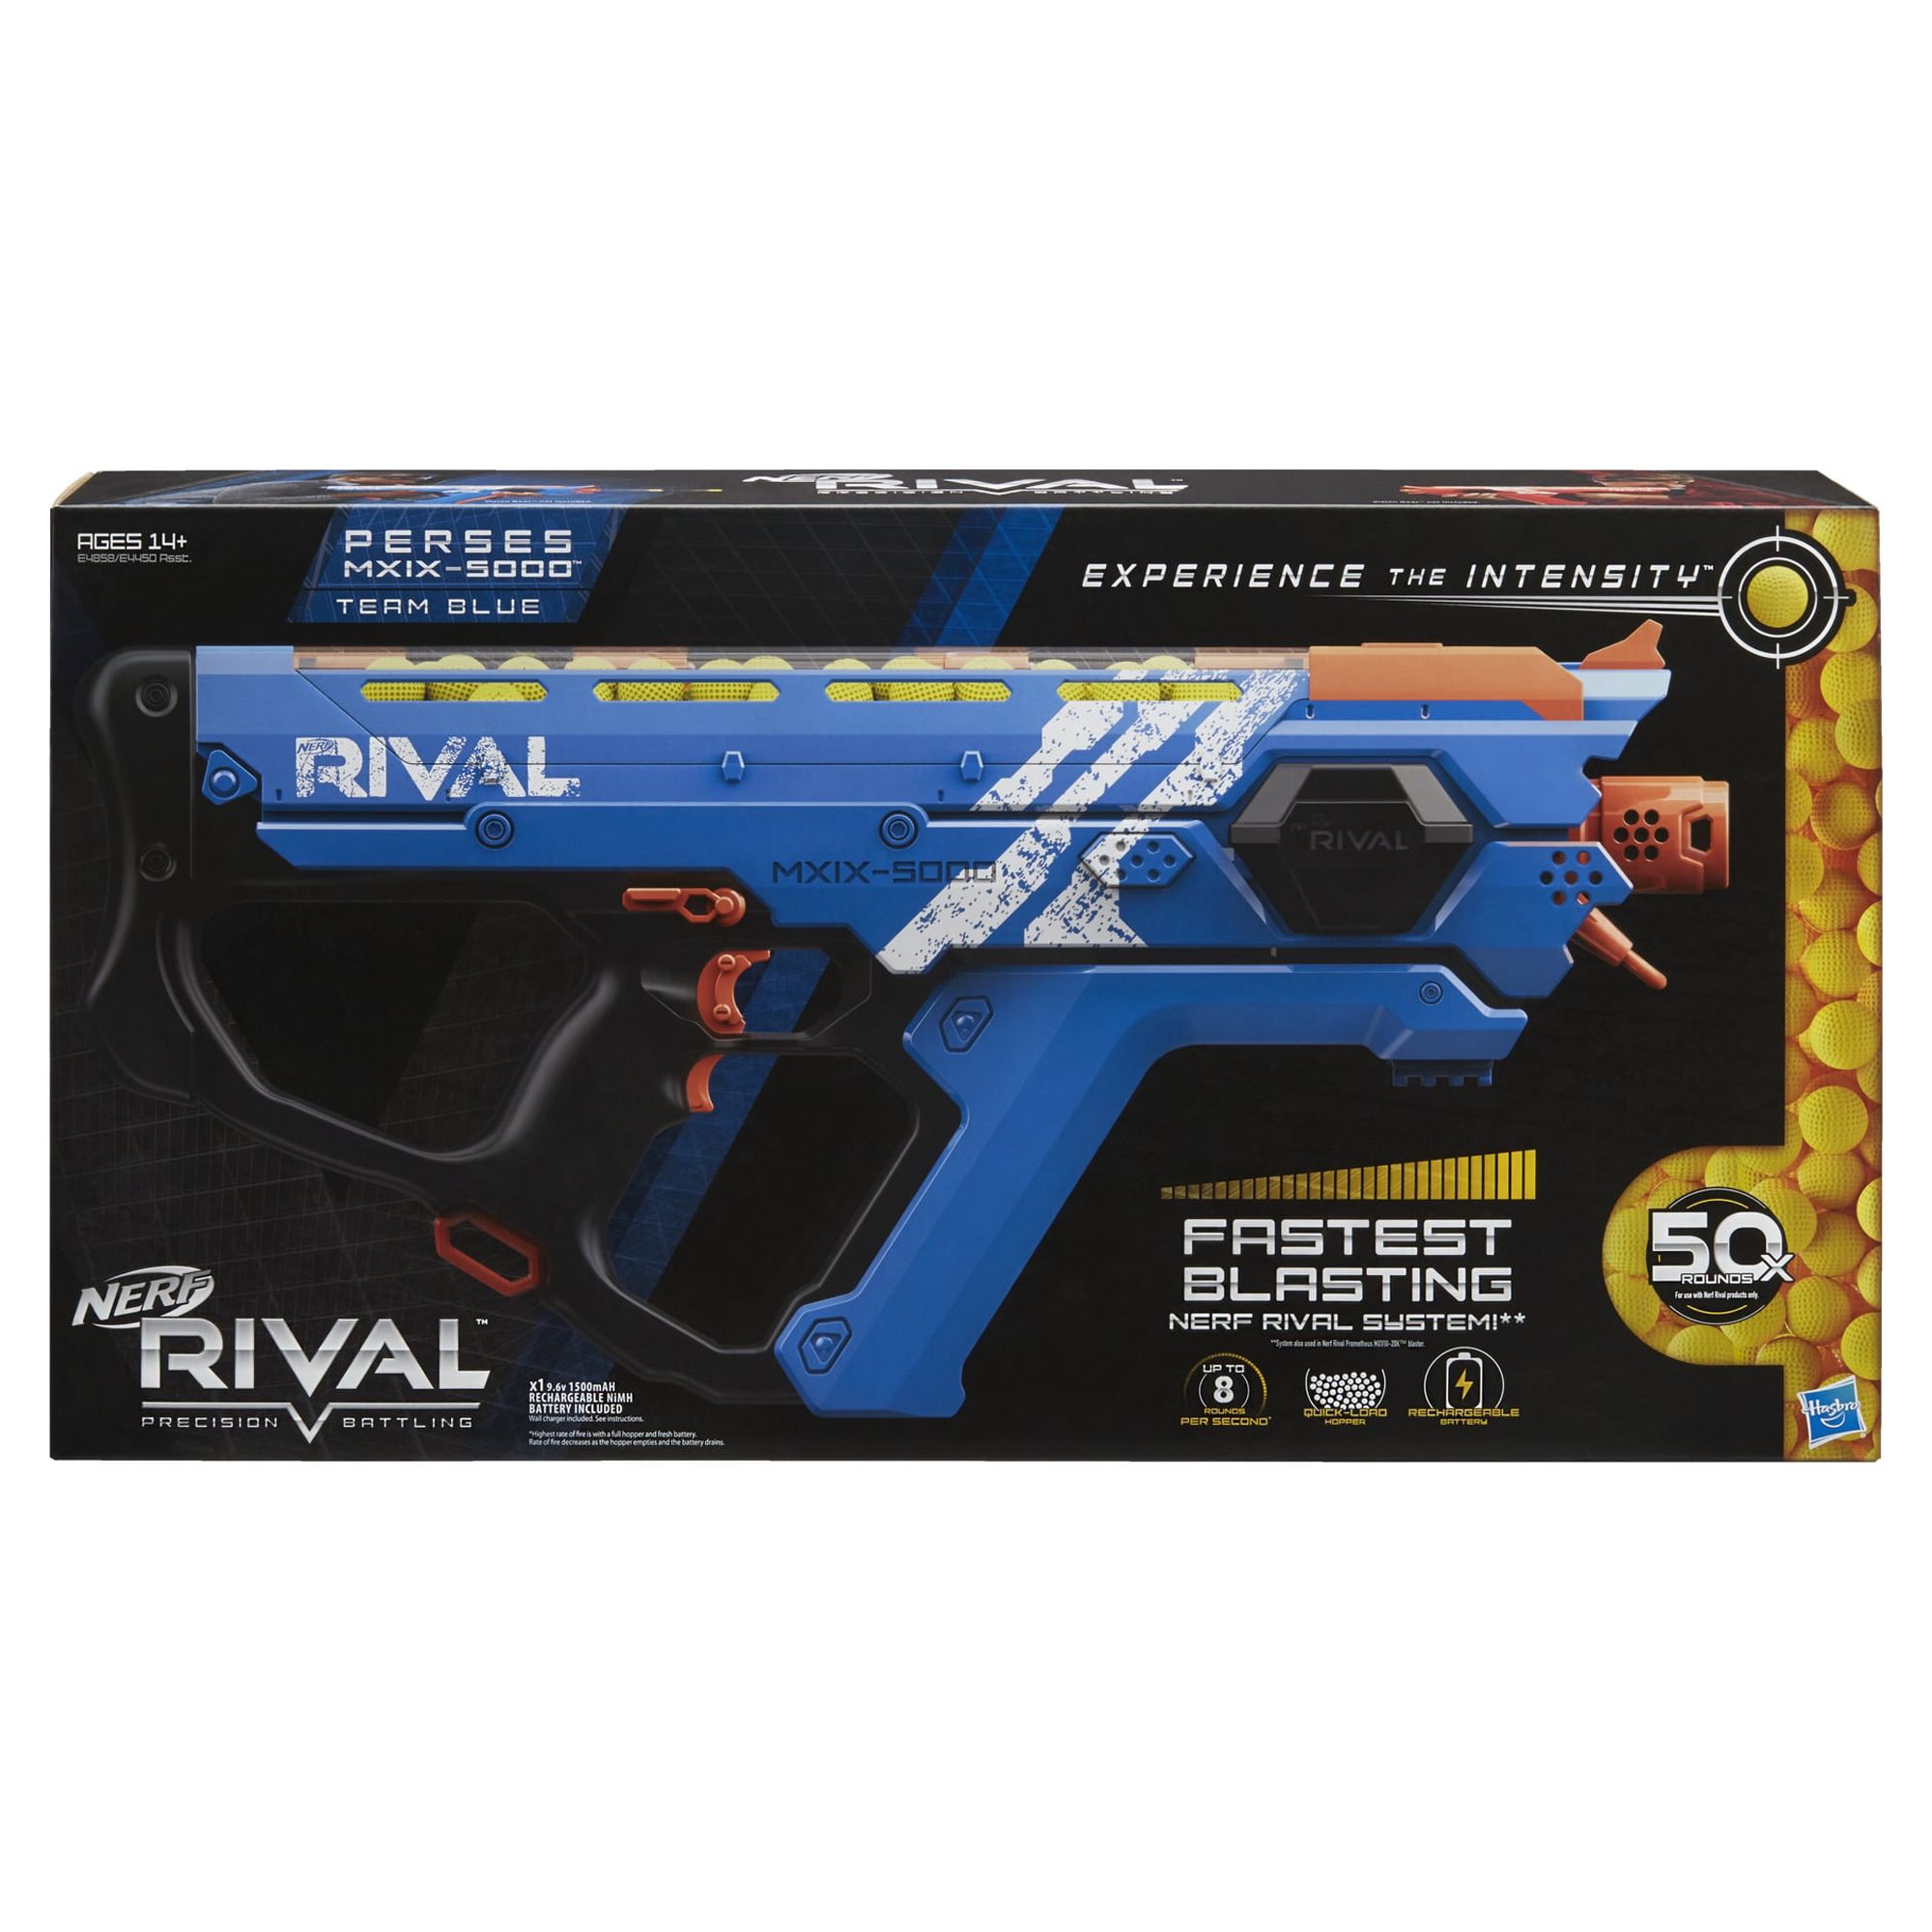 Nerf Rival Perses MXIX-5000 Team Blue Motorized Kids Toy Blaster with 50 Ball Dart Rounds for Ages 14 and Up - image 3 of 8